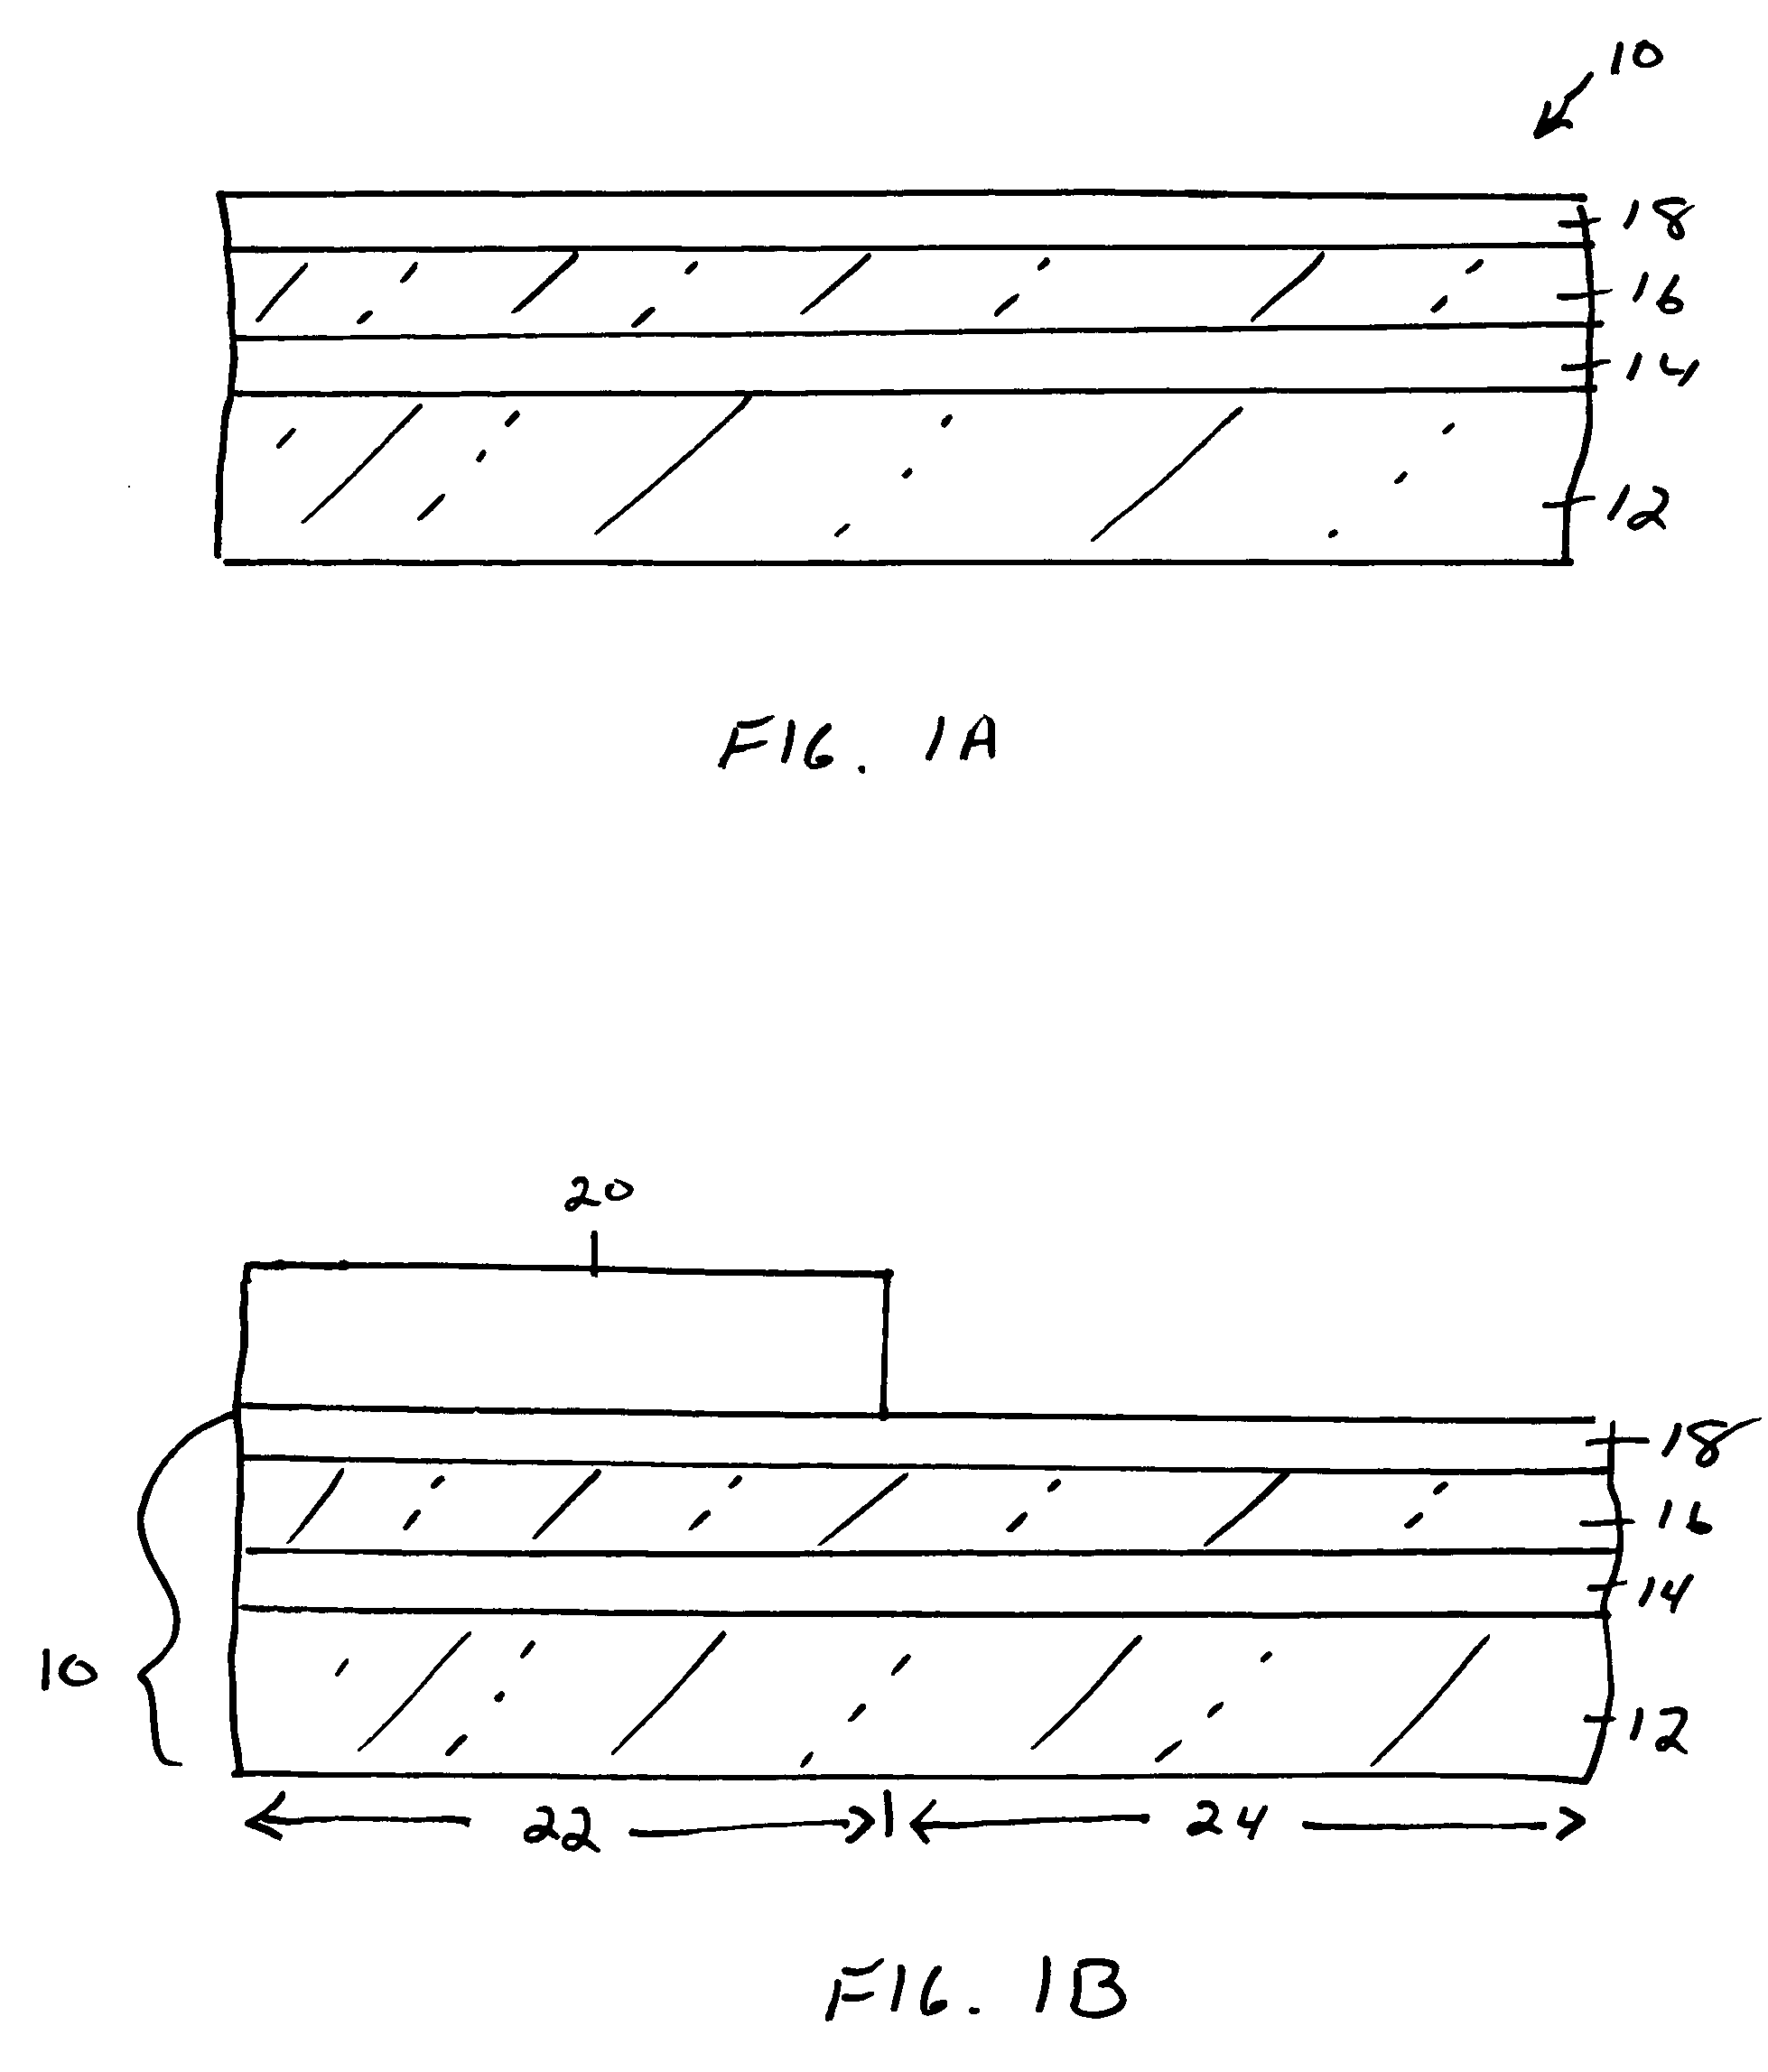 Structure and method of fabricating a hybrid substrate for high-performance hybrid-orientation silicon-on-insulator CMOS devices